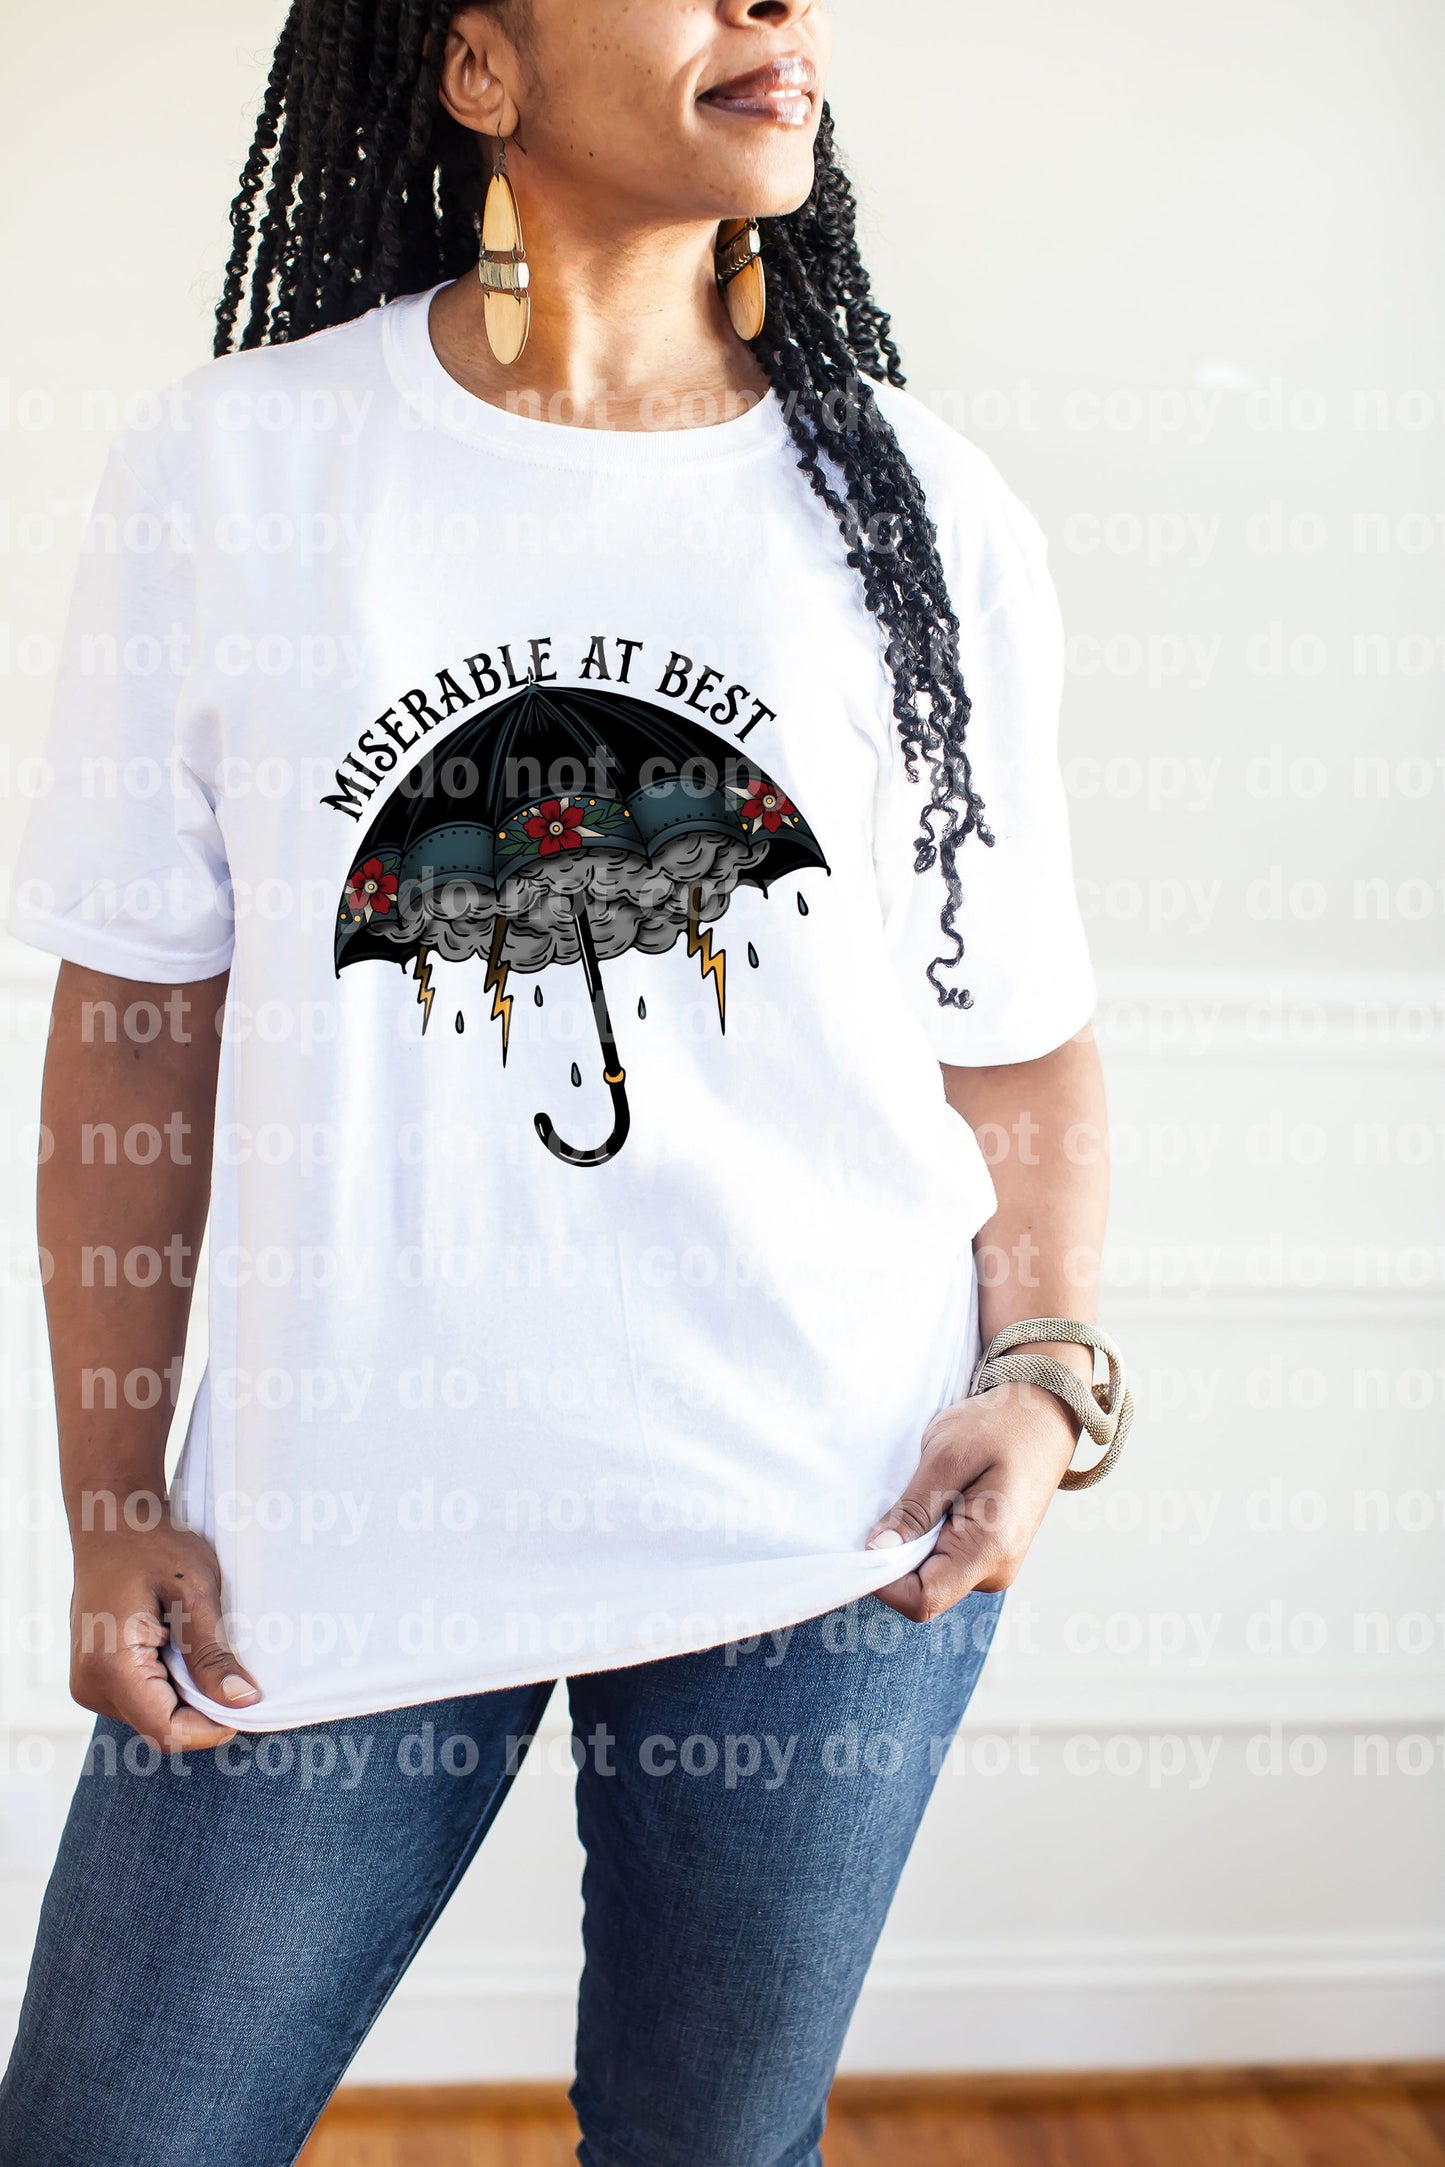 Miserable At Best Dream Print or Sublimation Print